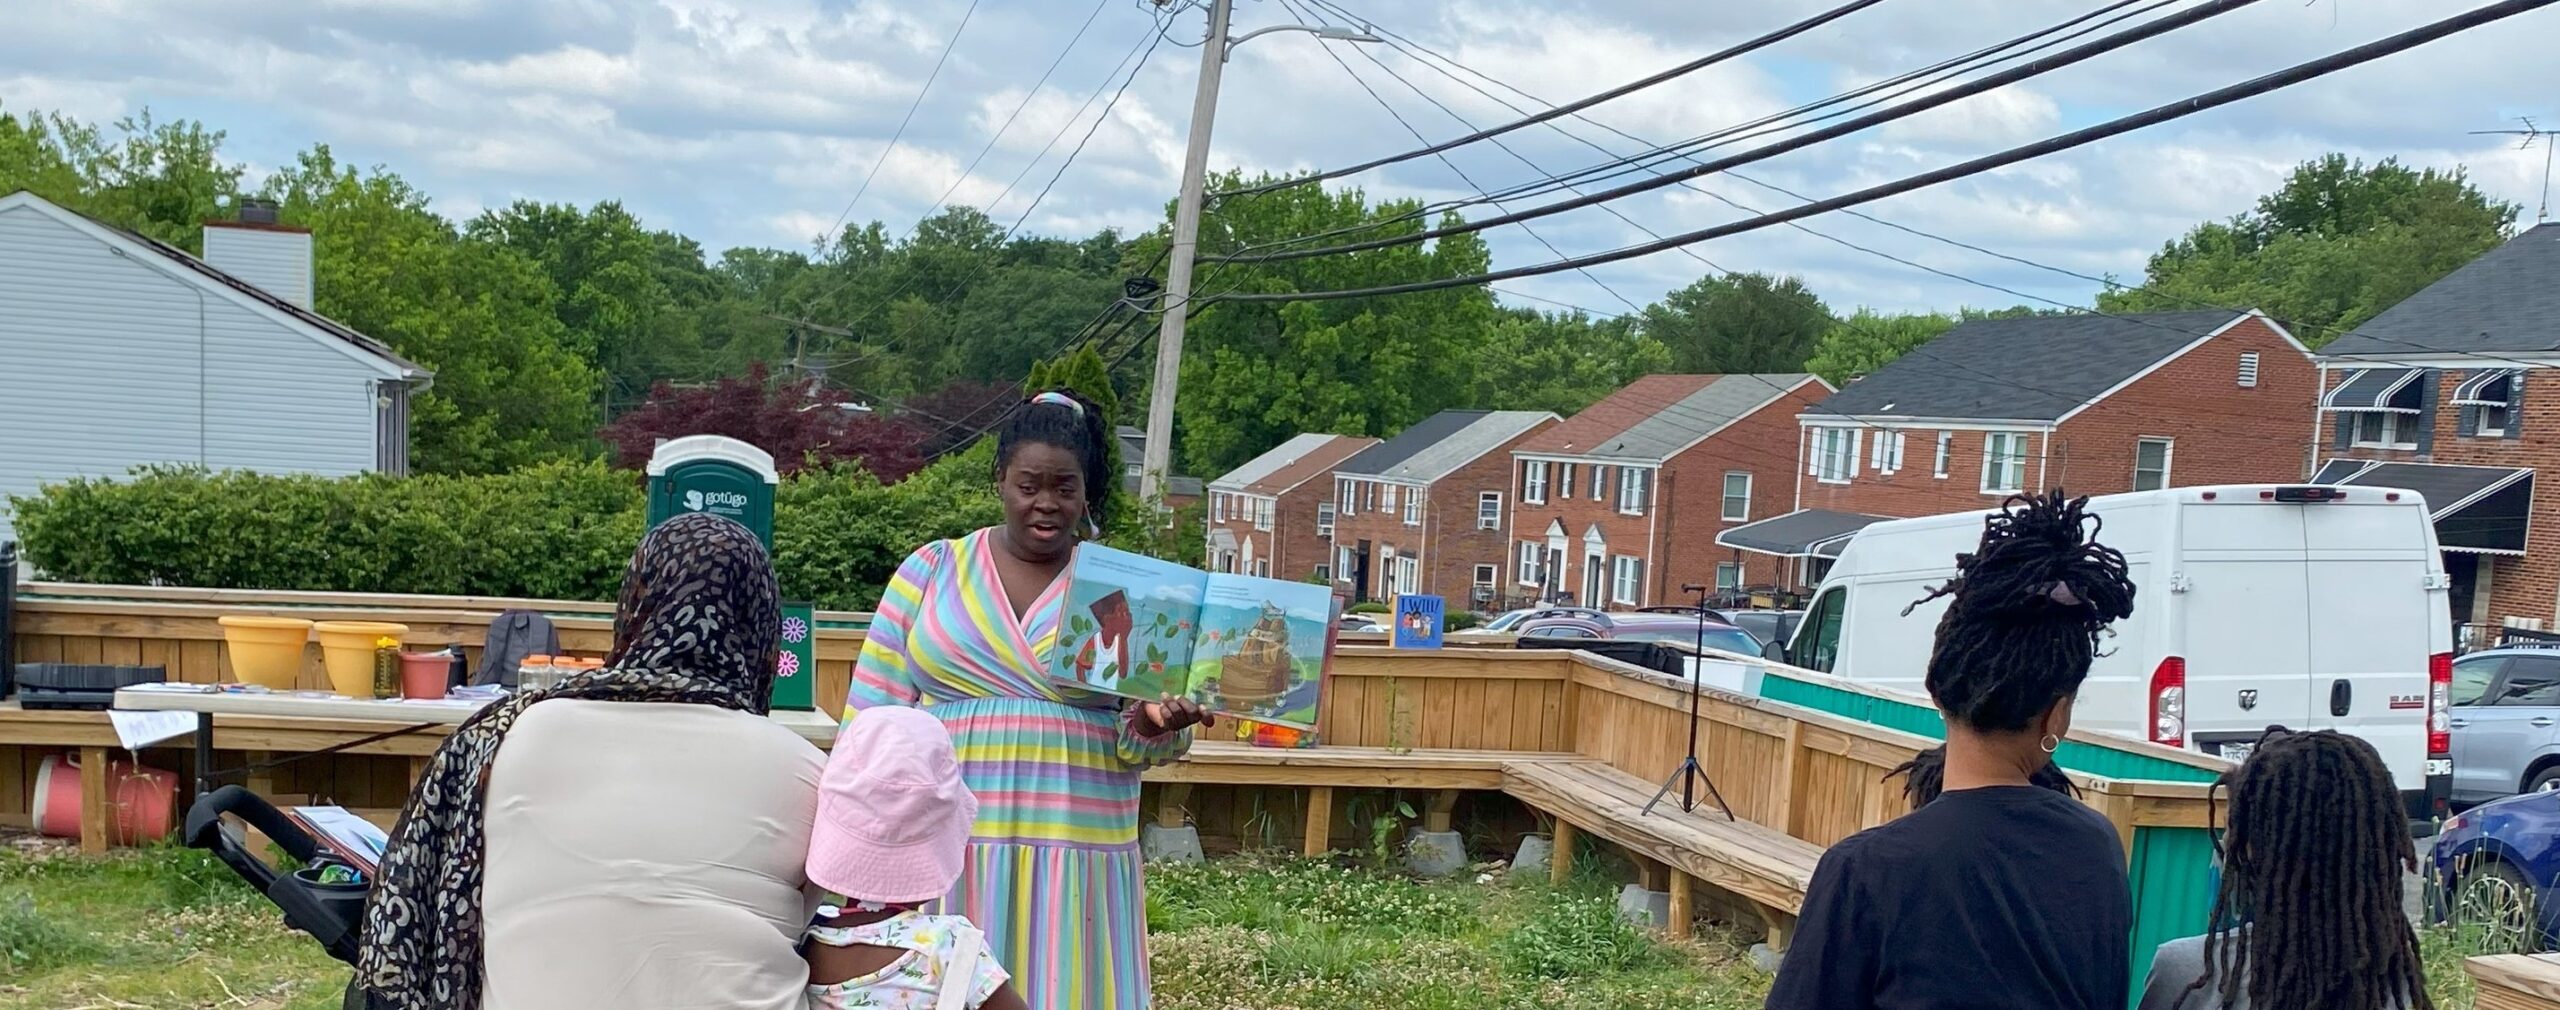 A person stands outside holding a picture book open in front of a small group of adults and children.